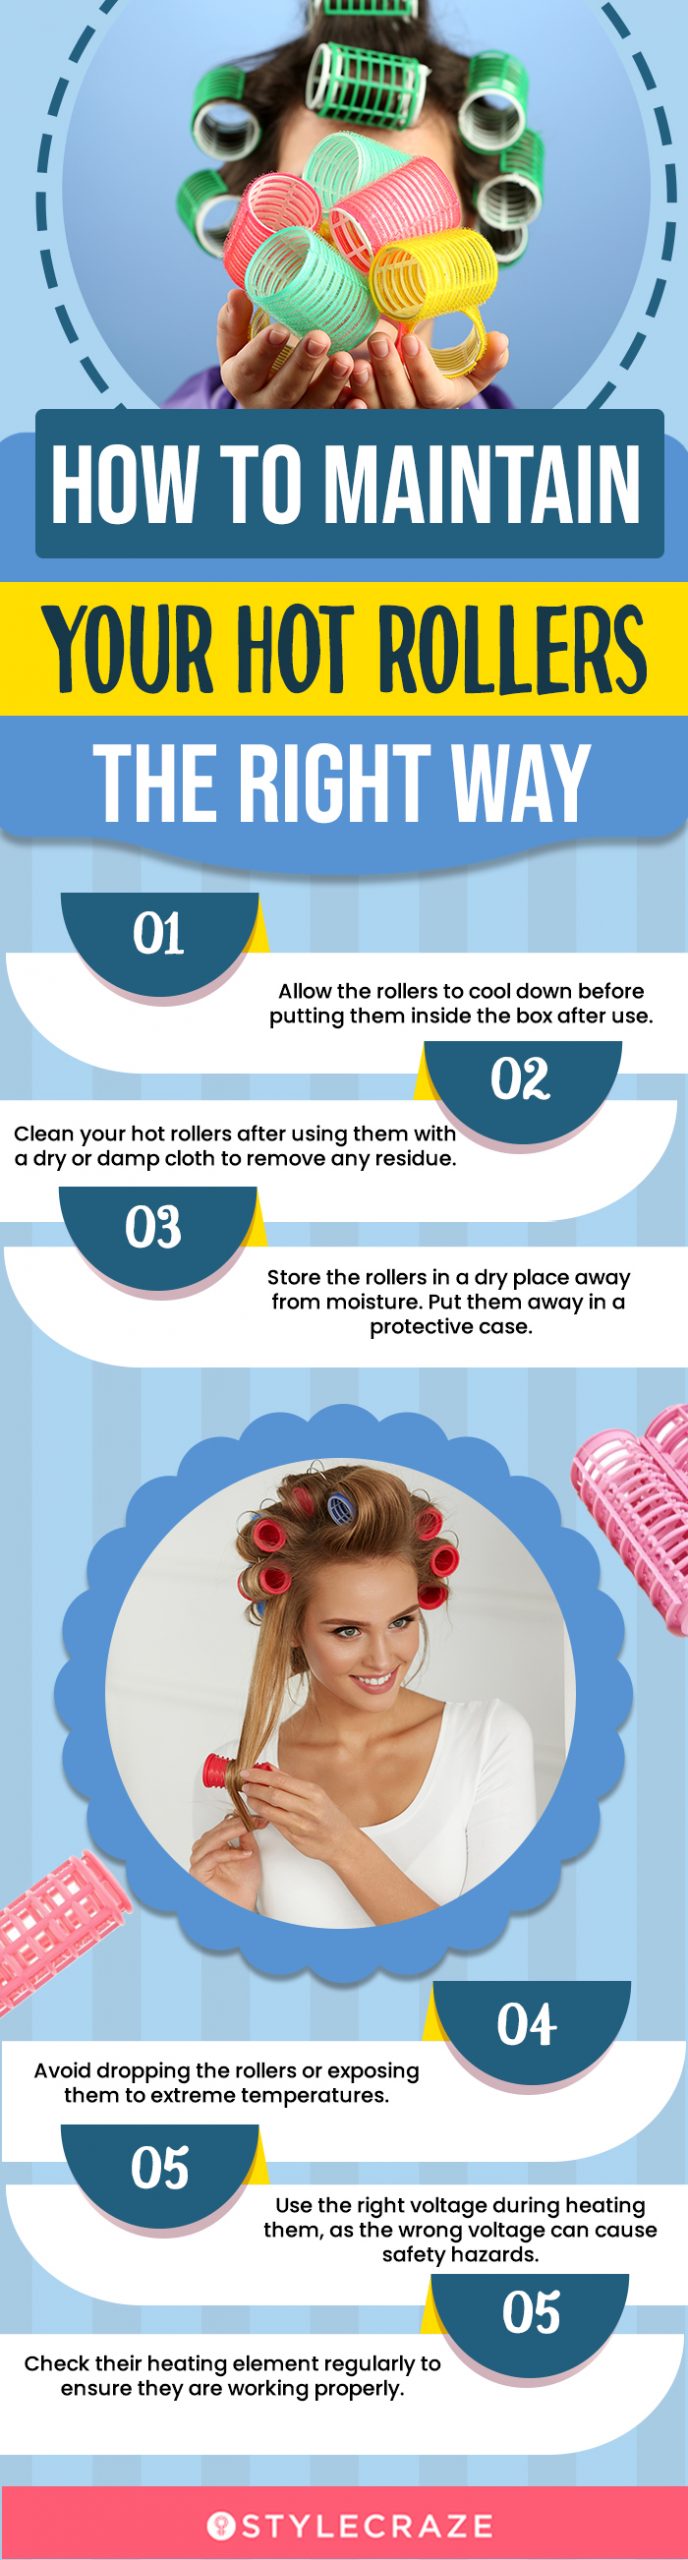 How To Maintain Your Hot Rollers The Right Way (infographic)